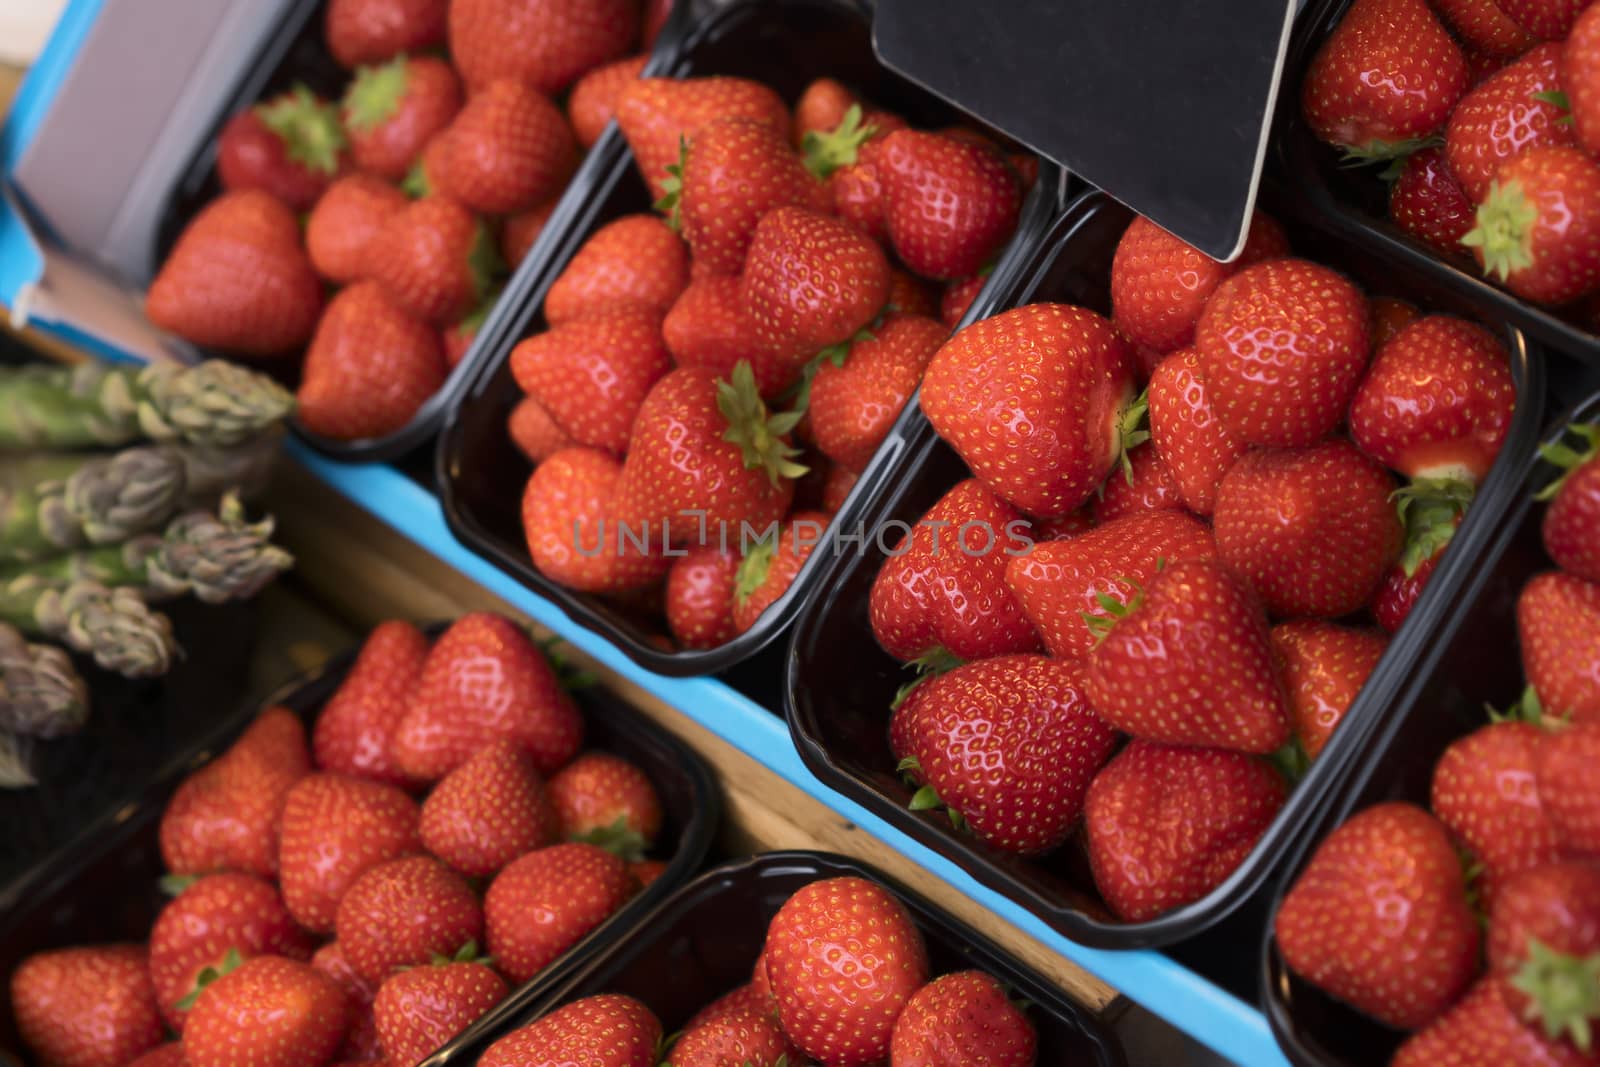 Baskets of fresh bright red seasonal strawberries on market stand for sale